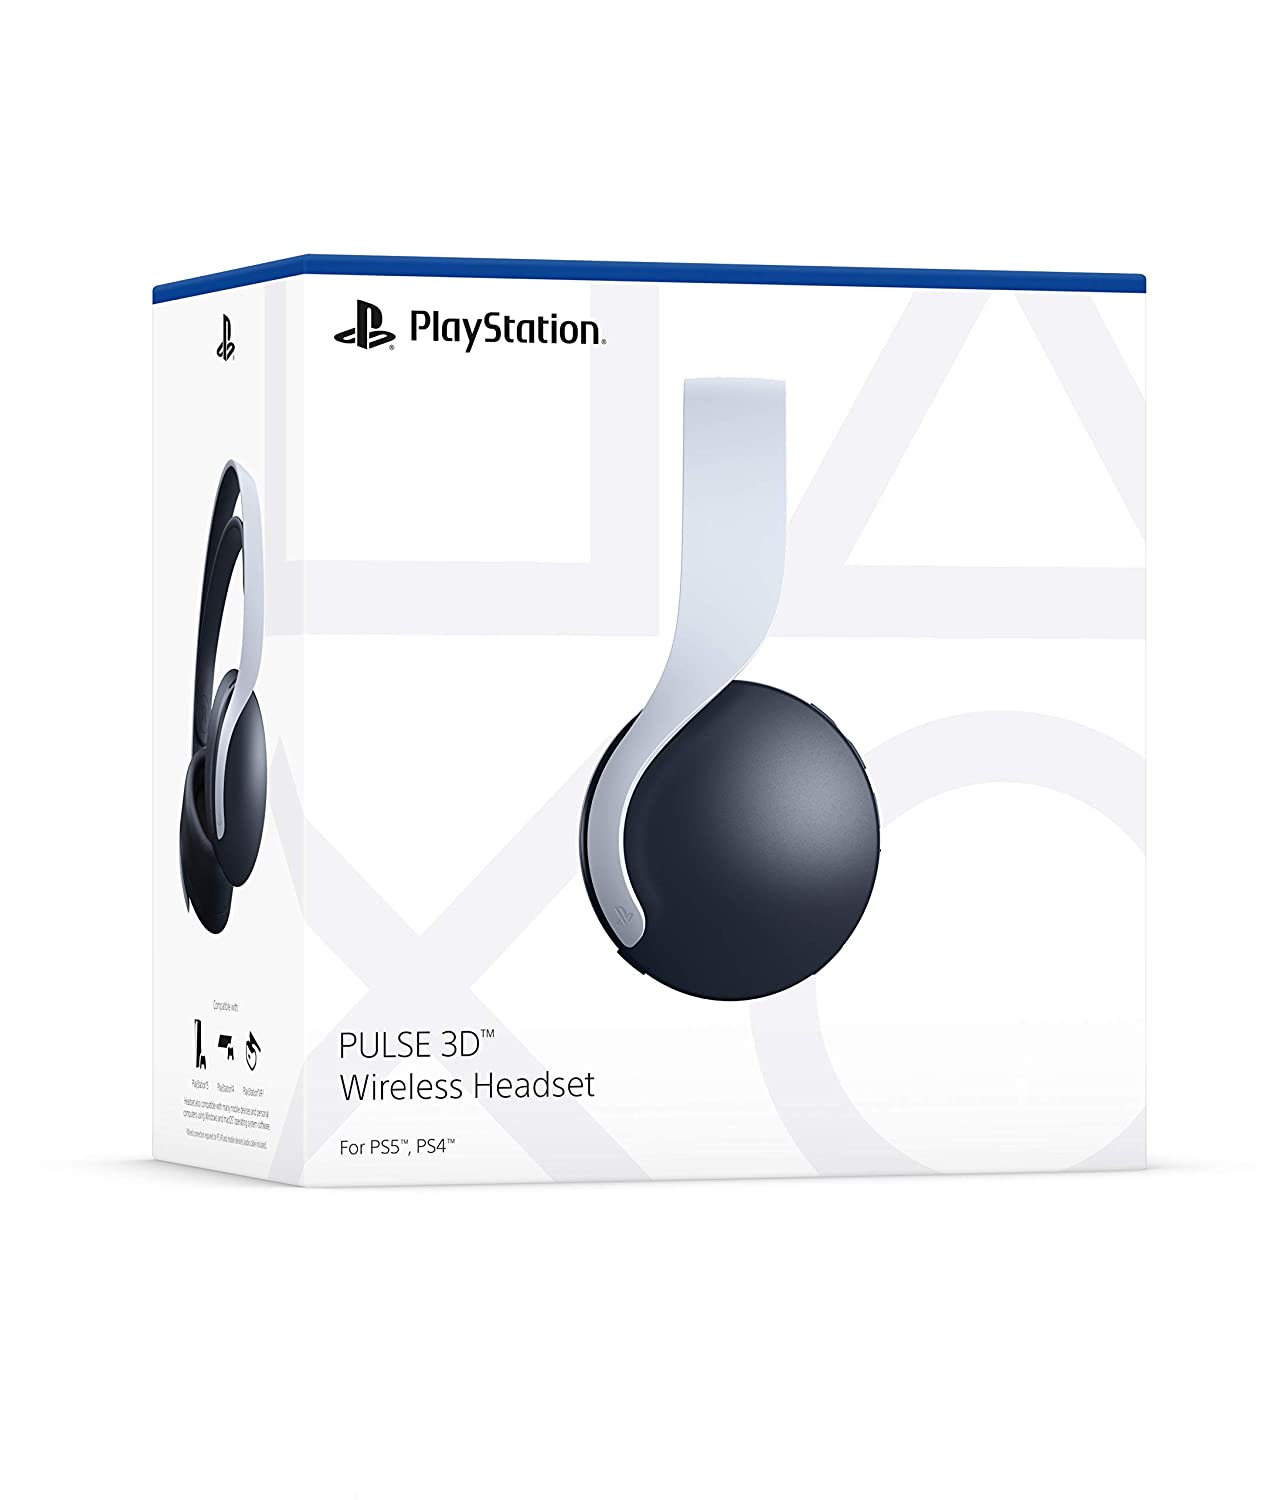 Play Station Pluse 3D 01